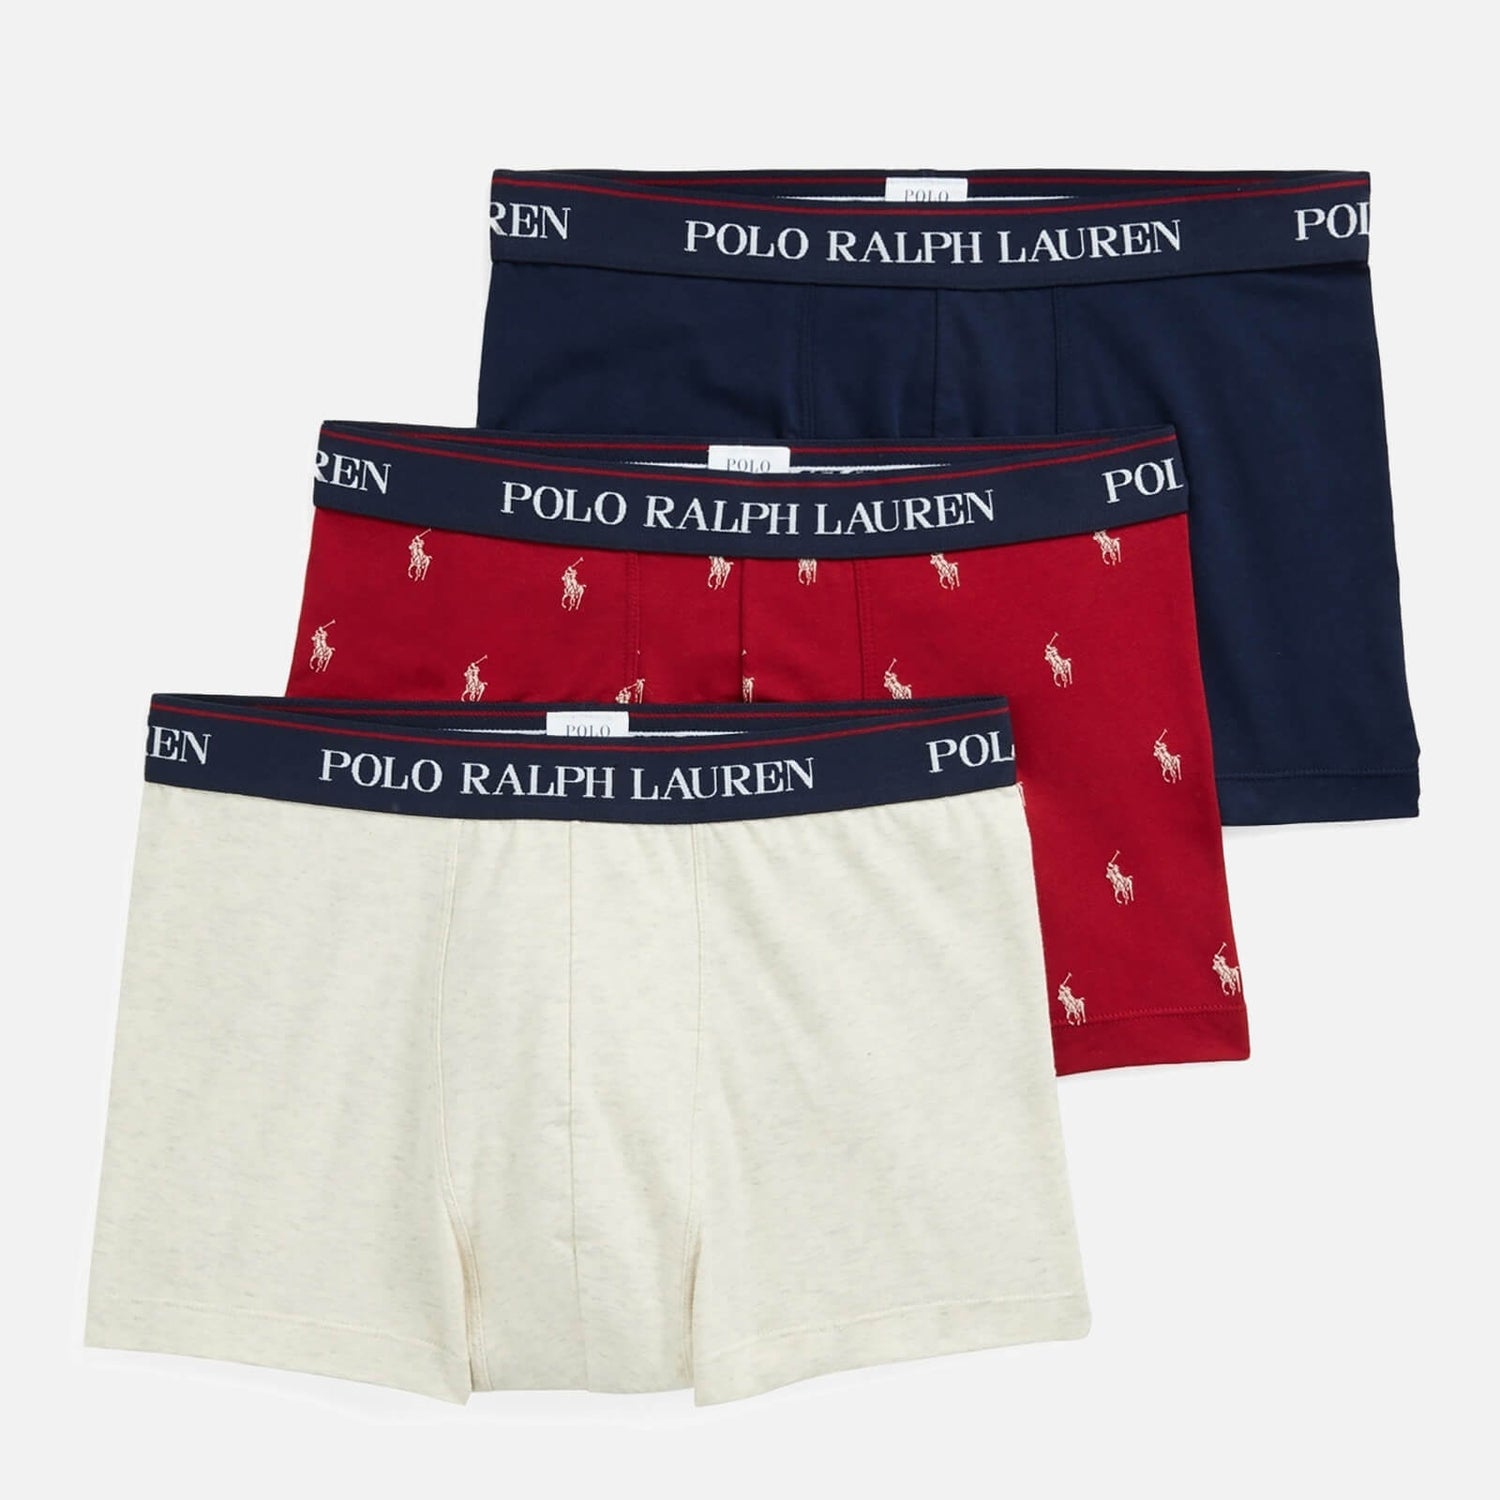 Polo Ralph Lauren Men's 3-Pack Classic Trunk Boxer Shorts - Navy/Red/Oatmeal